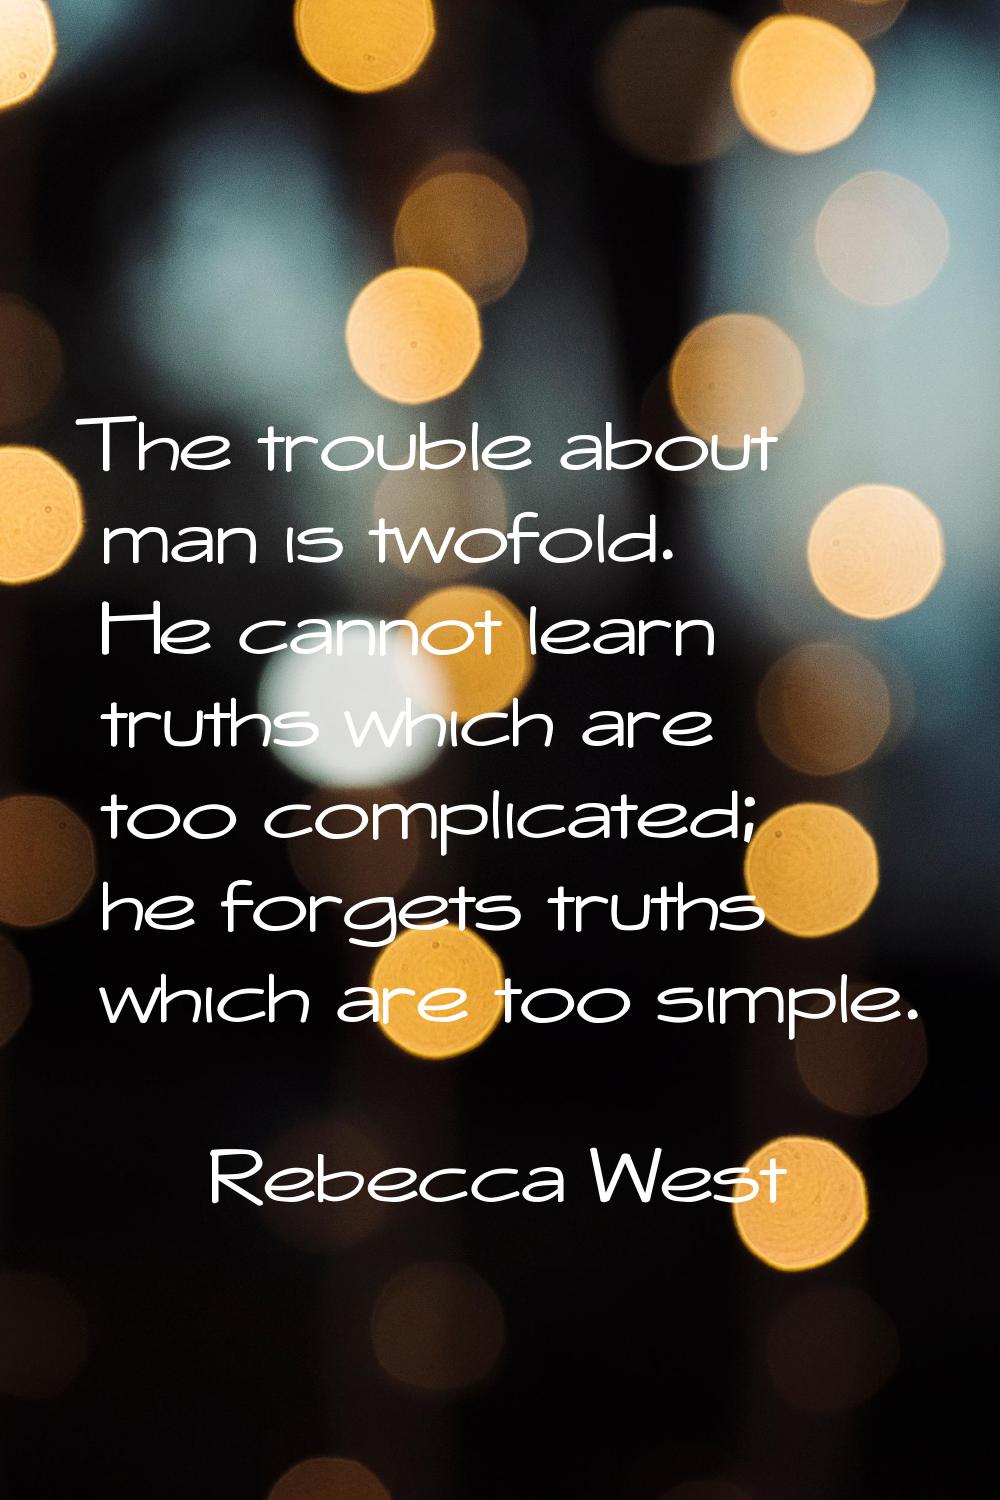 The trouble about man is twofold. He cannot learn truths which are too complicated; he forgets trut